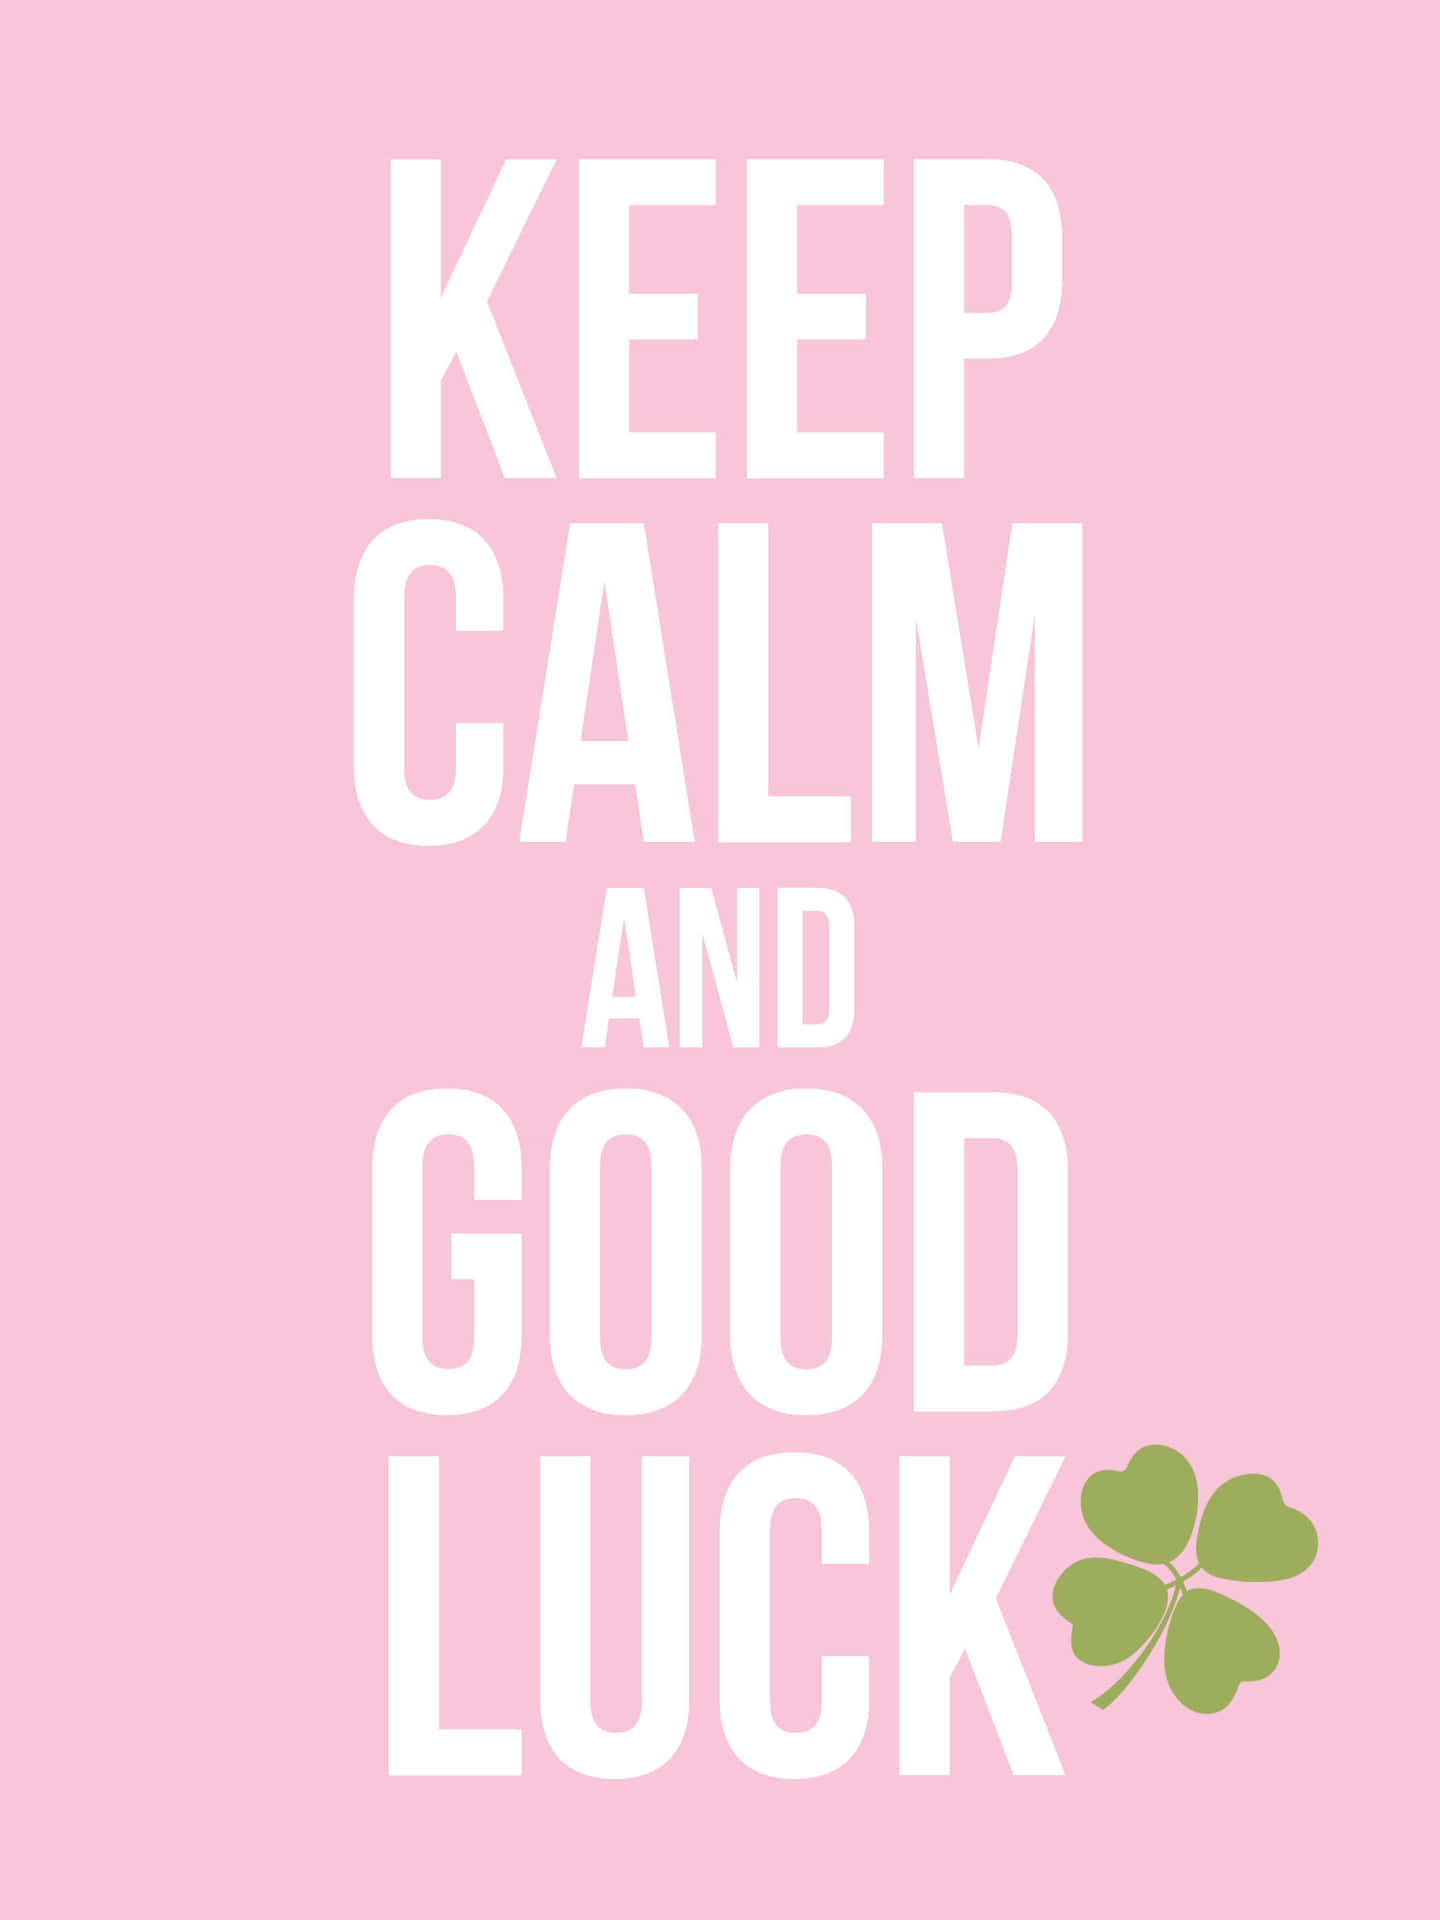 Wishing Good Luck in All Endeavors